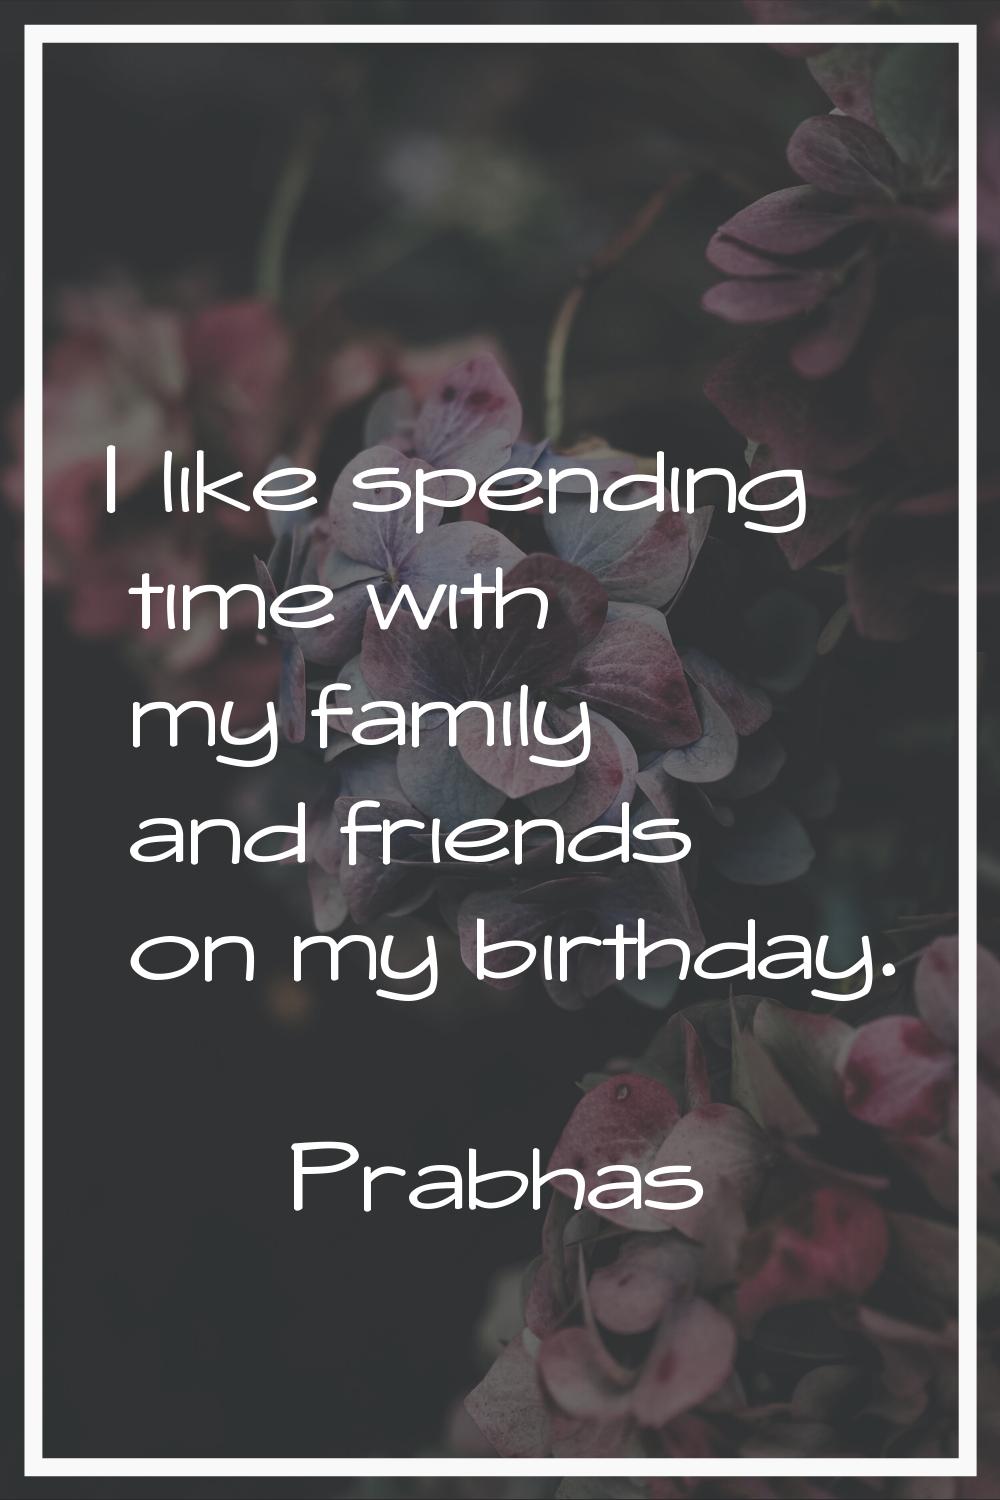 I like spending time with my family and friends on my birthday.